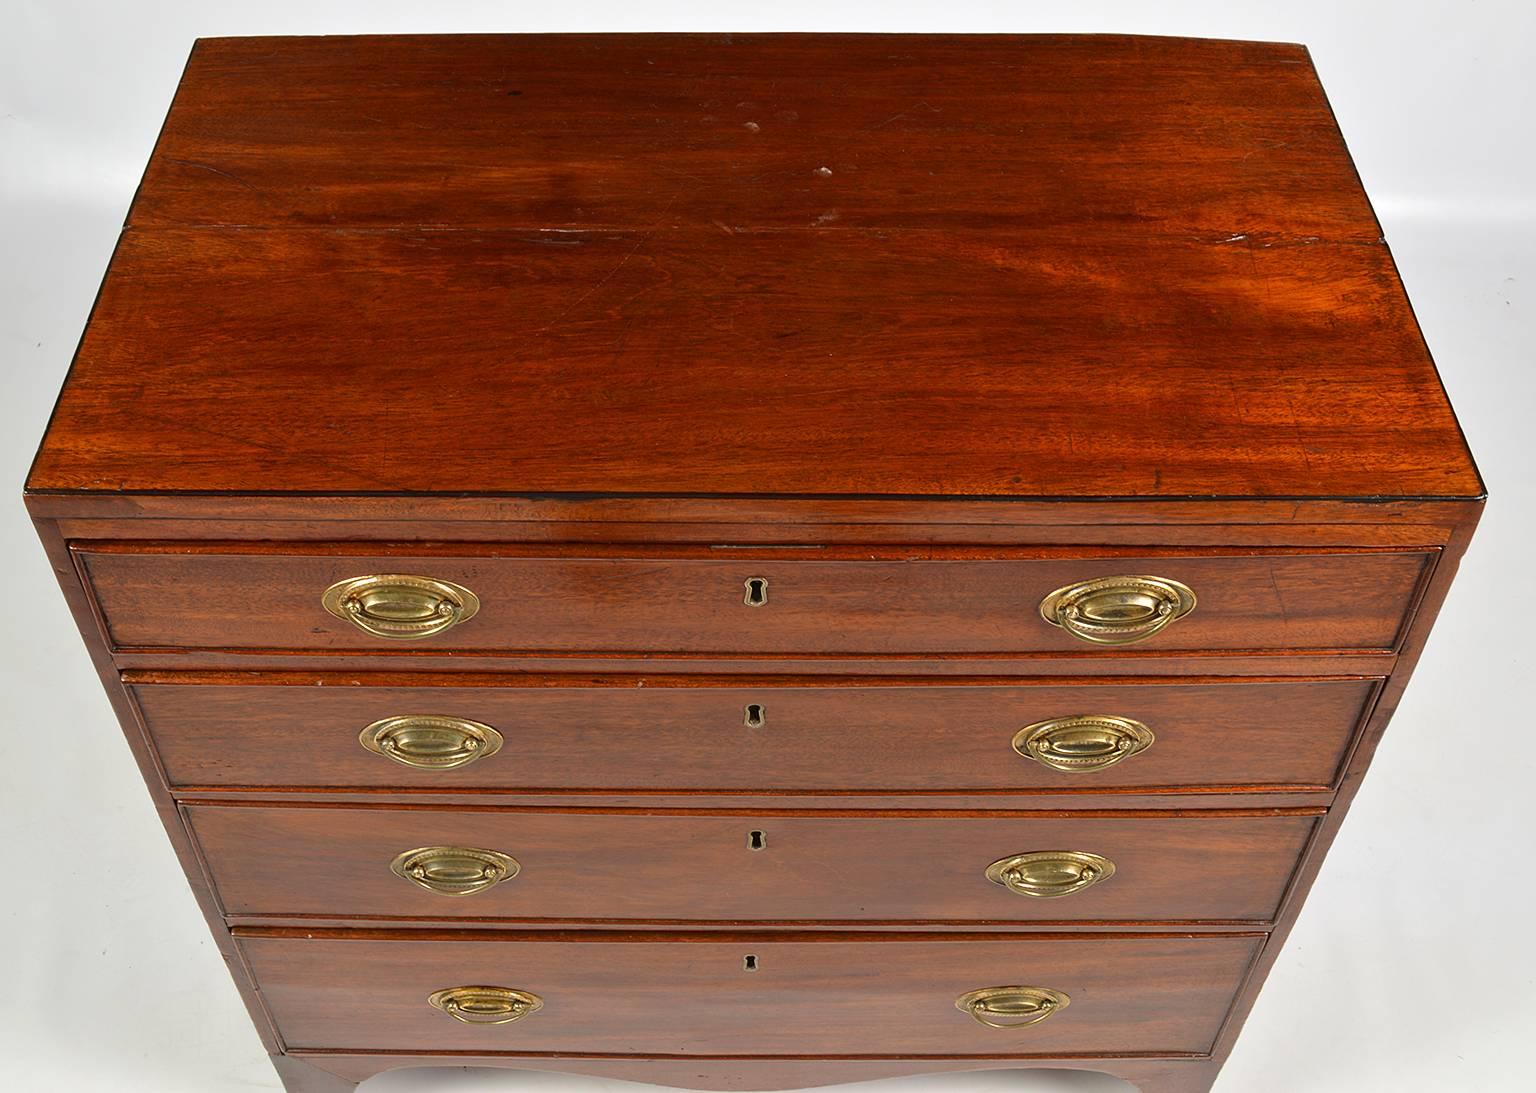 Of attractive small proportions this fine Georgian mahogany chest features a caddy style polished top above four graduated drawers retaining their original brasses and resting on a serpentine shaped apron on bracket feet.